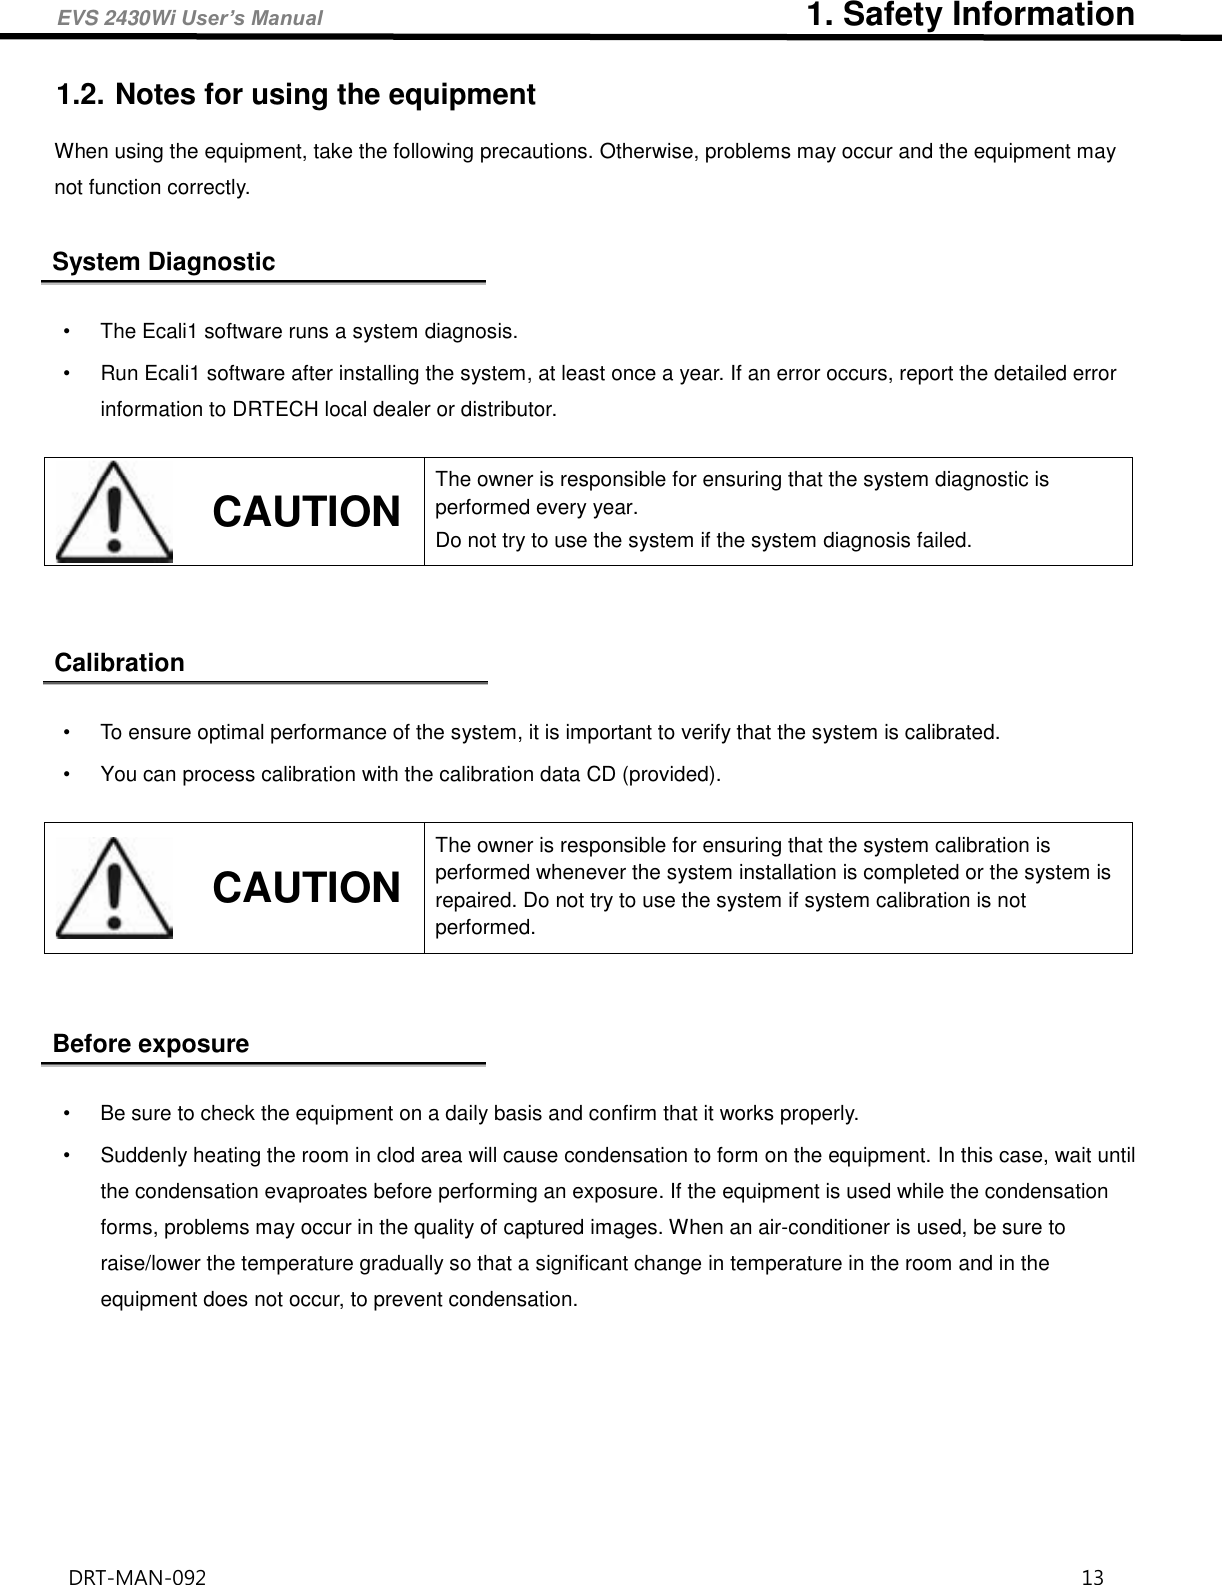 EVS 2430Wi User’s Manual                             1. Safety Information DRT-MAN-092                                                                                    13   1.2. Notes for using the equipment When using the equipment, take the following precautions. Otherwise, problems may occur and the equipment may not function correctly.  System Diagnostic  •  The Ecali1 software runs a system diagnosis. •  Run Ecali1 software after installing the system, at least once a year. If an error occurs, report the detailed error information to DRTECH local dealer or distributor.     Calibration  •  To ensure optimal performance of the system, it is important to verify that the system is calibrated. •  You can process calibration with the calibration data CD (provided).       Before exposure  •  Be sure to check the equipment on a daily basis and confirm that it works properly. •  Suddenly heating the room in clod area will cause condensation to form on the equipment. In this case, wait until the condensation evaproates before performing an exposure. If the equipment is used while the condensation forms, problems may occur in the quality of captured images. When an air-conditioner is used, be sure to raise/lower the temperature gradually so that a significant change in temperature in the room and in the equipment does not occur, to prevent condensation.      CAUTION The owner is responsible for ensuring that the system diagnostic is performed every year.   Do not try to use the system if the system diagnosis failed.    CAUTION The owner is responsible for ensuring that the system calibration is performed whenever the system installation is completed or the system is repaired. Do not try to use the system if system calibration is not performed.   